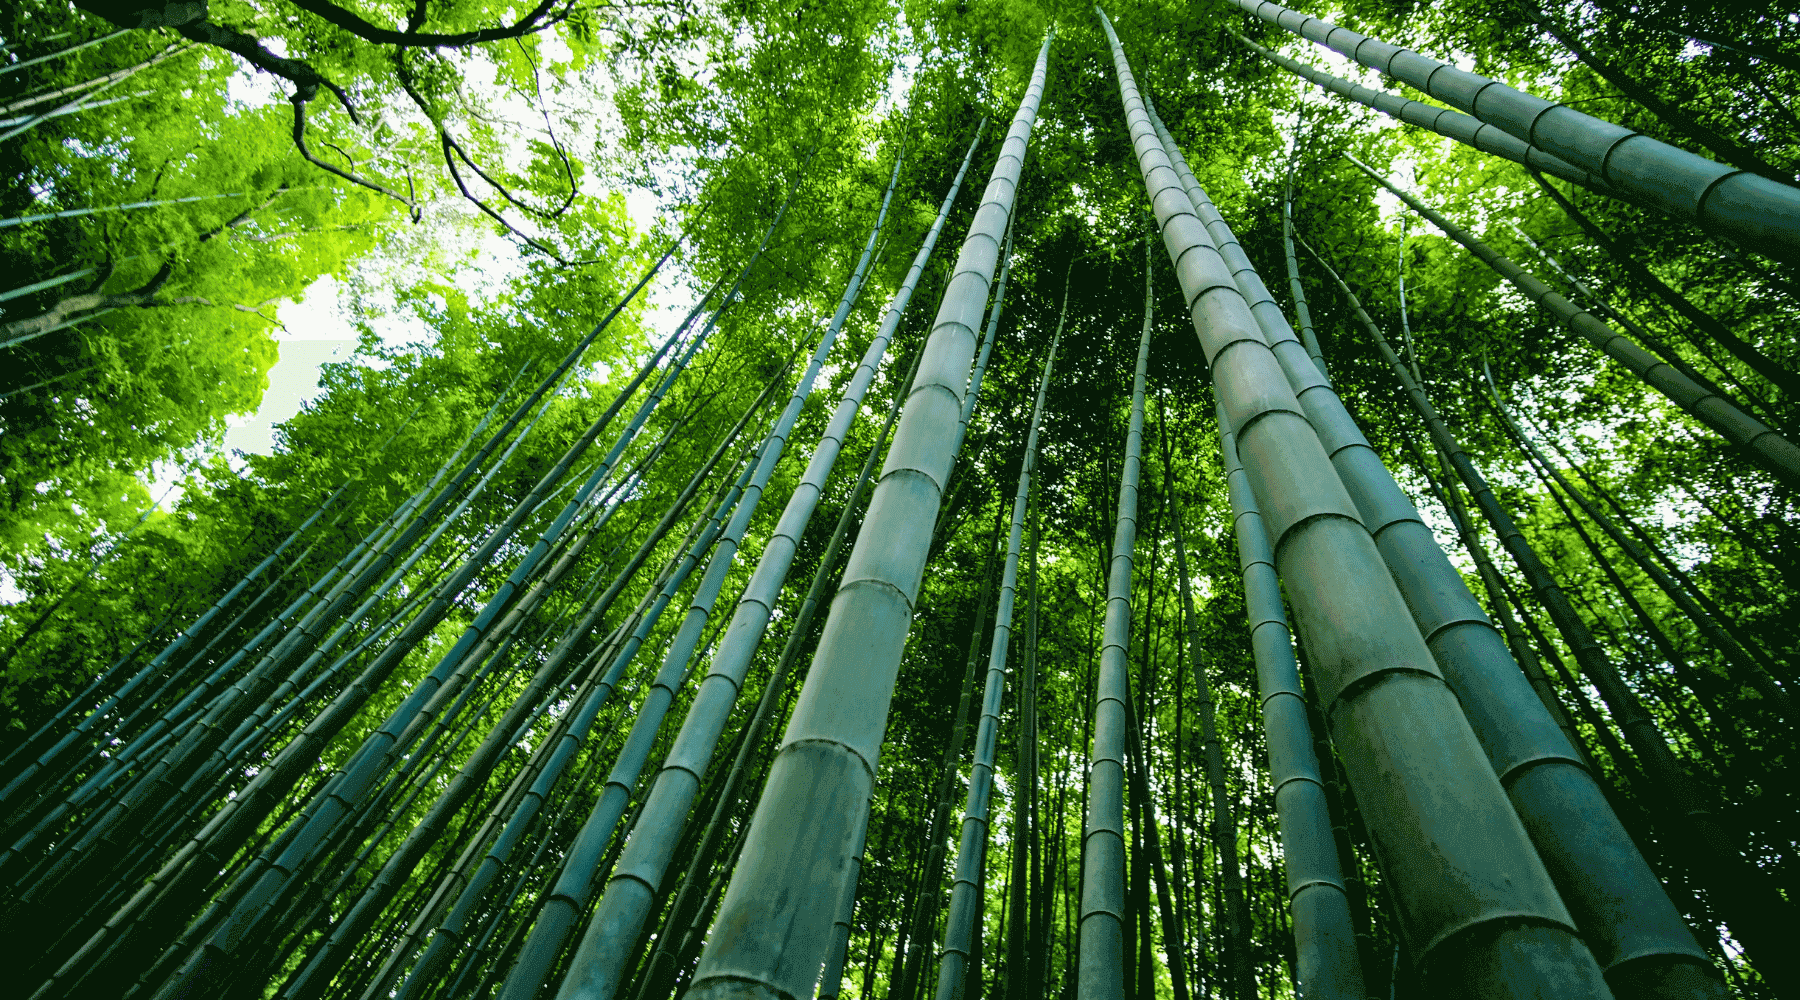 Why Bamboo is best from a Sustainability Perspective